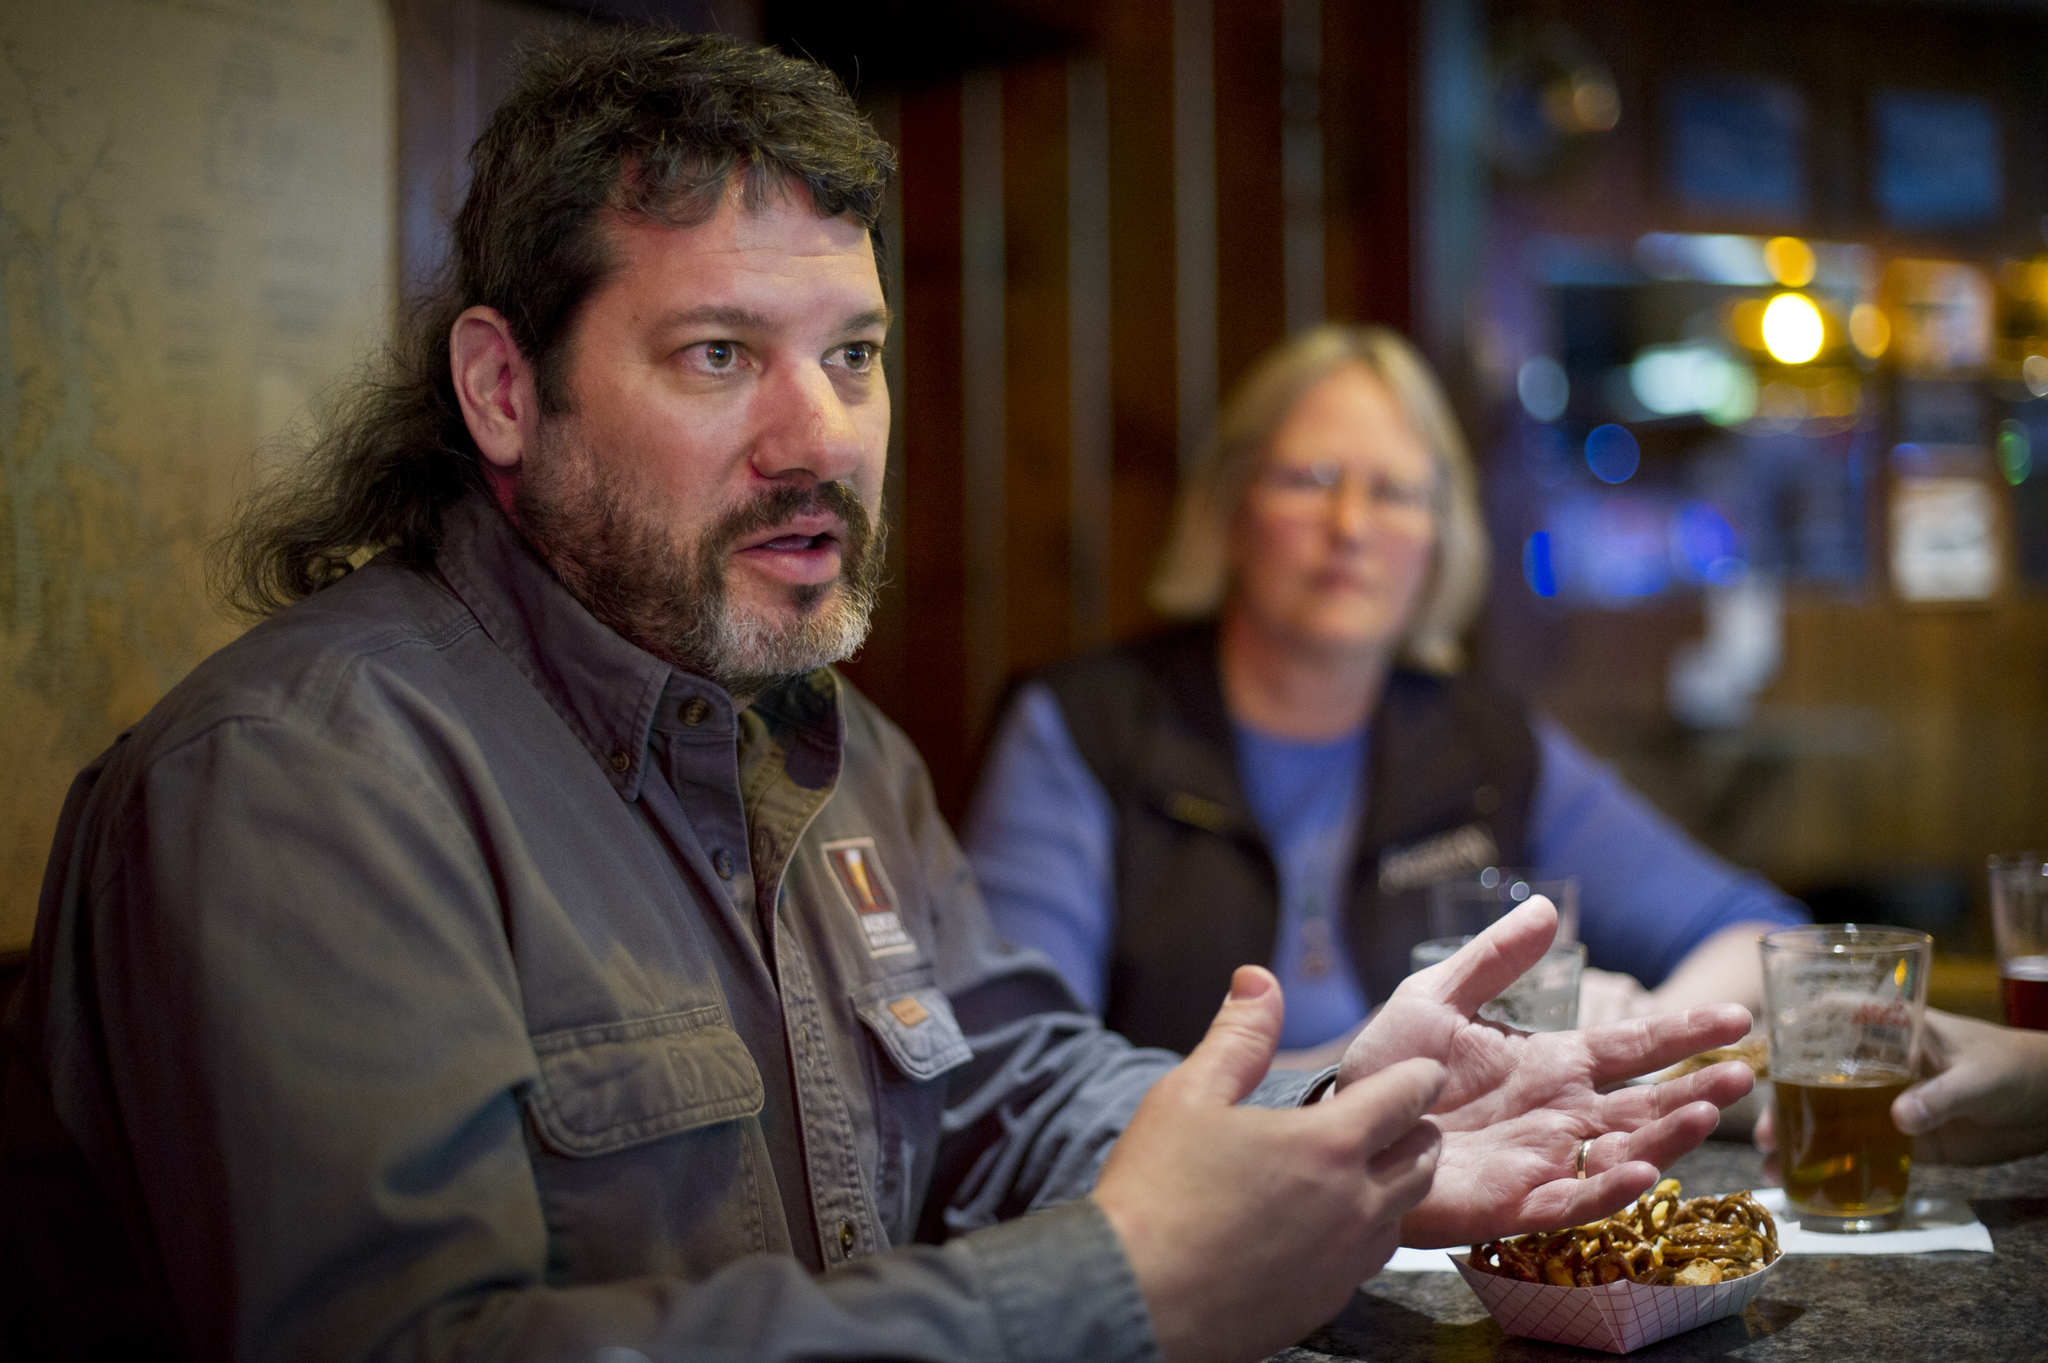 Paul Gatza, director of the trade and advocacy group for craft beer brewers in the United States called Brewers Association, talks about the industry during a stop at the Triangle Bar in Juneau on Wednesday. (Michael Penn | Juneau Empire)